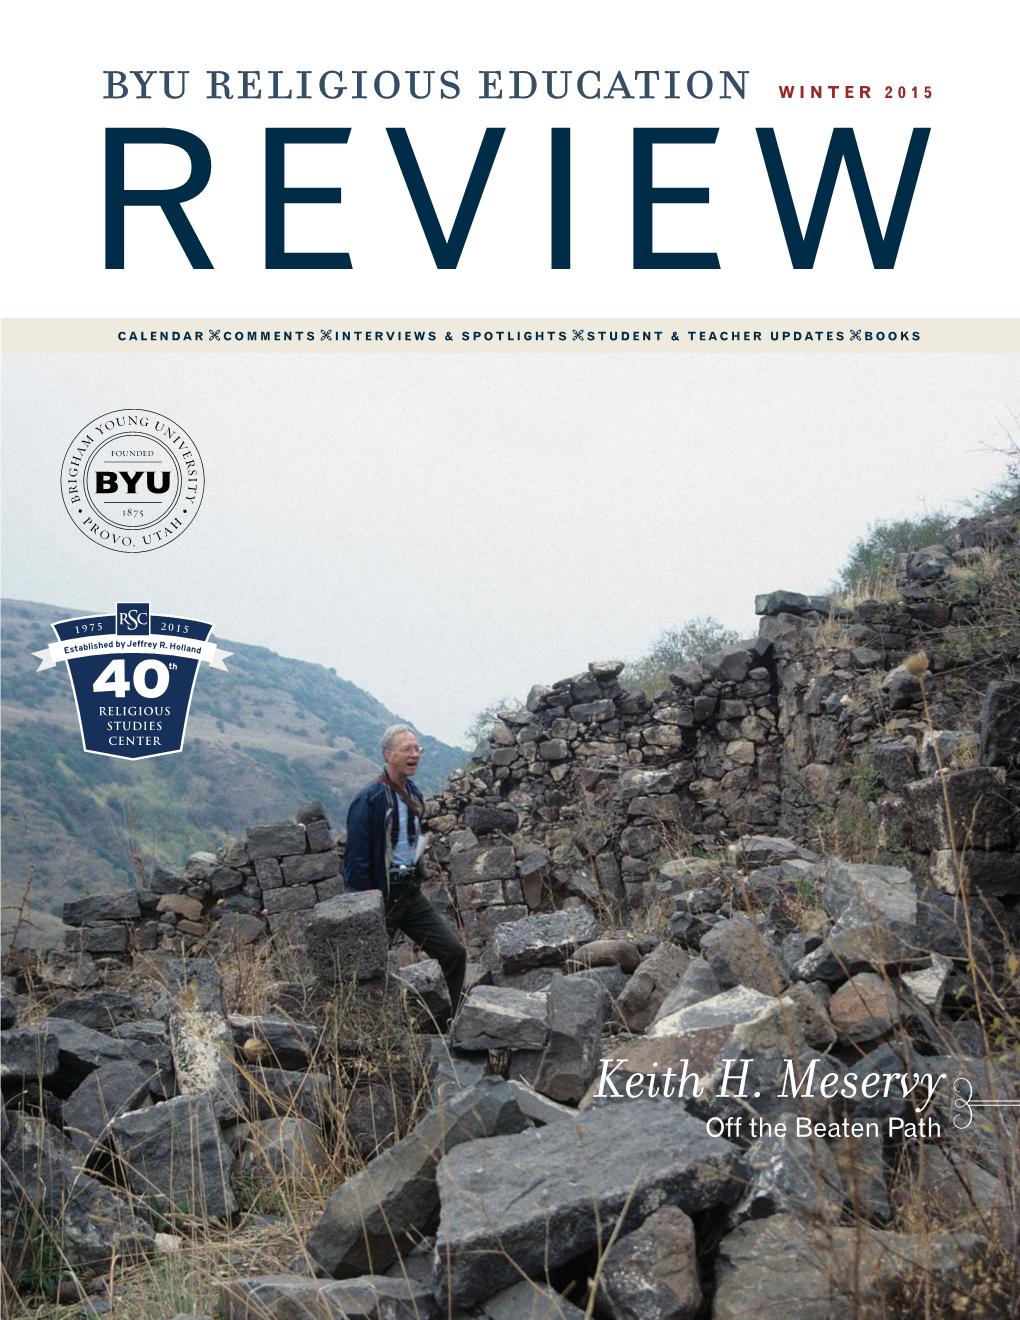 Byu Religious Education WINTER 2015 REVIEW